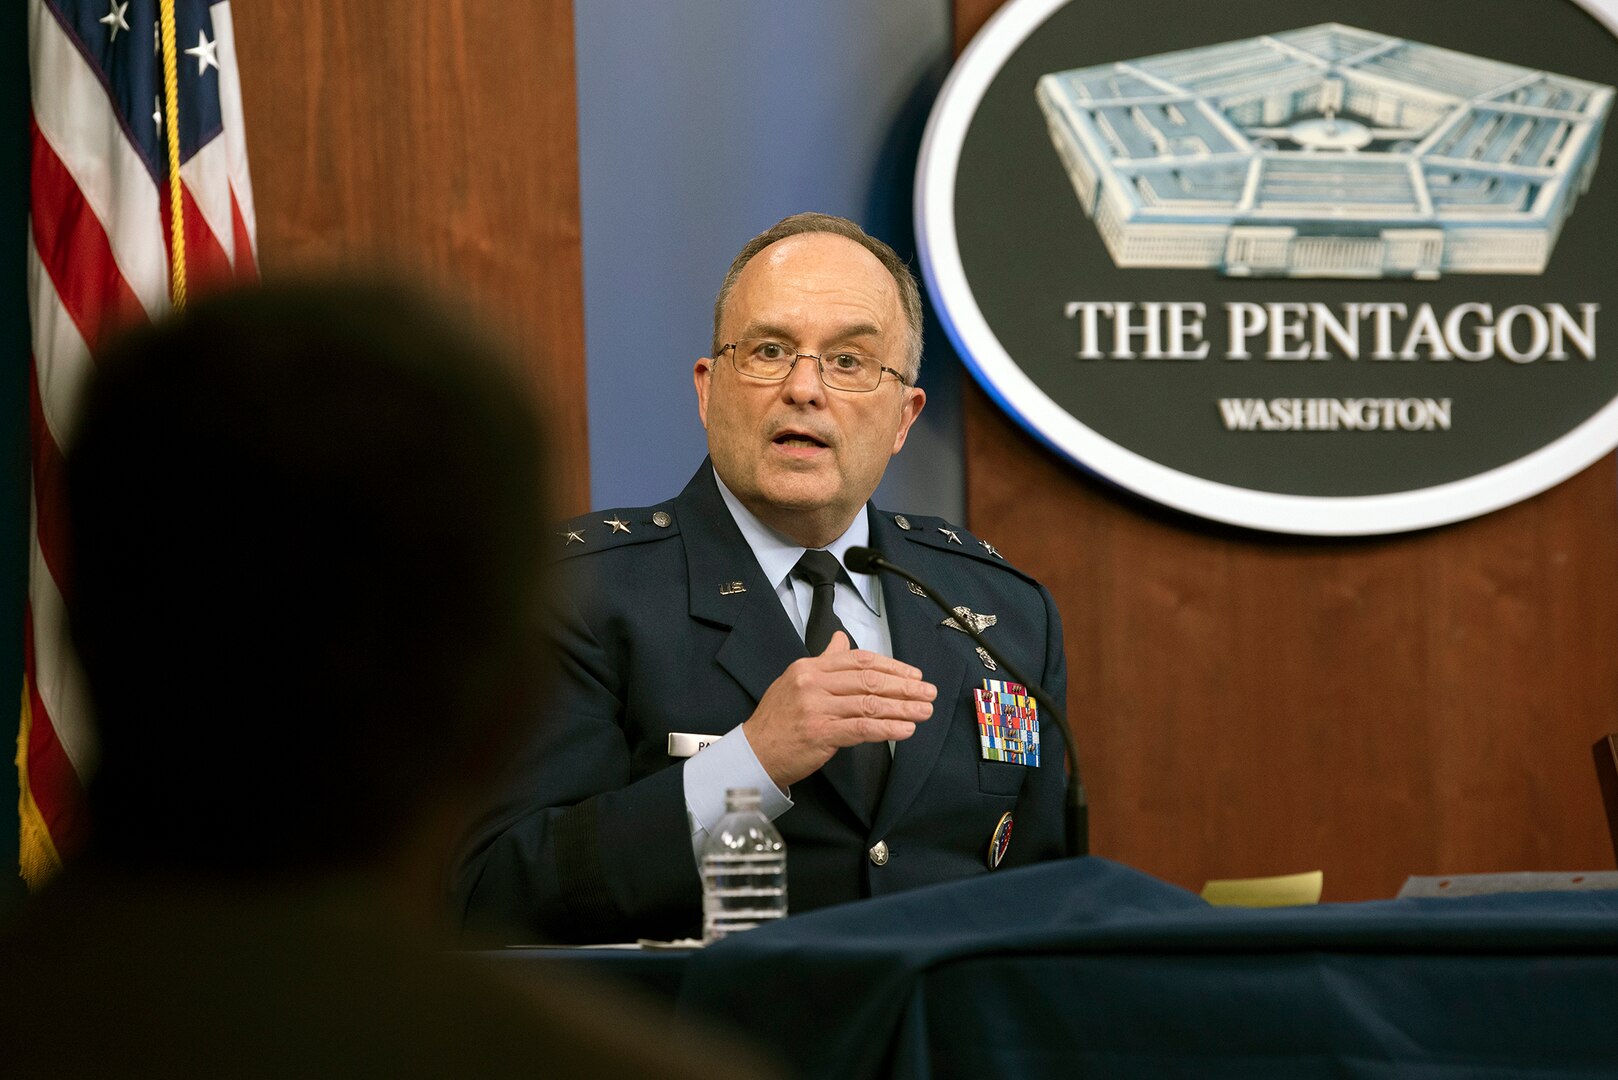 Air Force Maj. Gen. (Dr.) Lee E. Payne, assistant director for combat support at the Defense Health Agency and the diagnostics and testing lead for the Defense’s Department’s coronavirus task force, speaks during a Pentagon news conference on DOD COVID-19 testing, July 30, 2020.